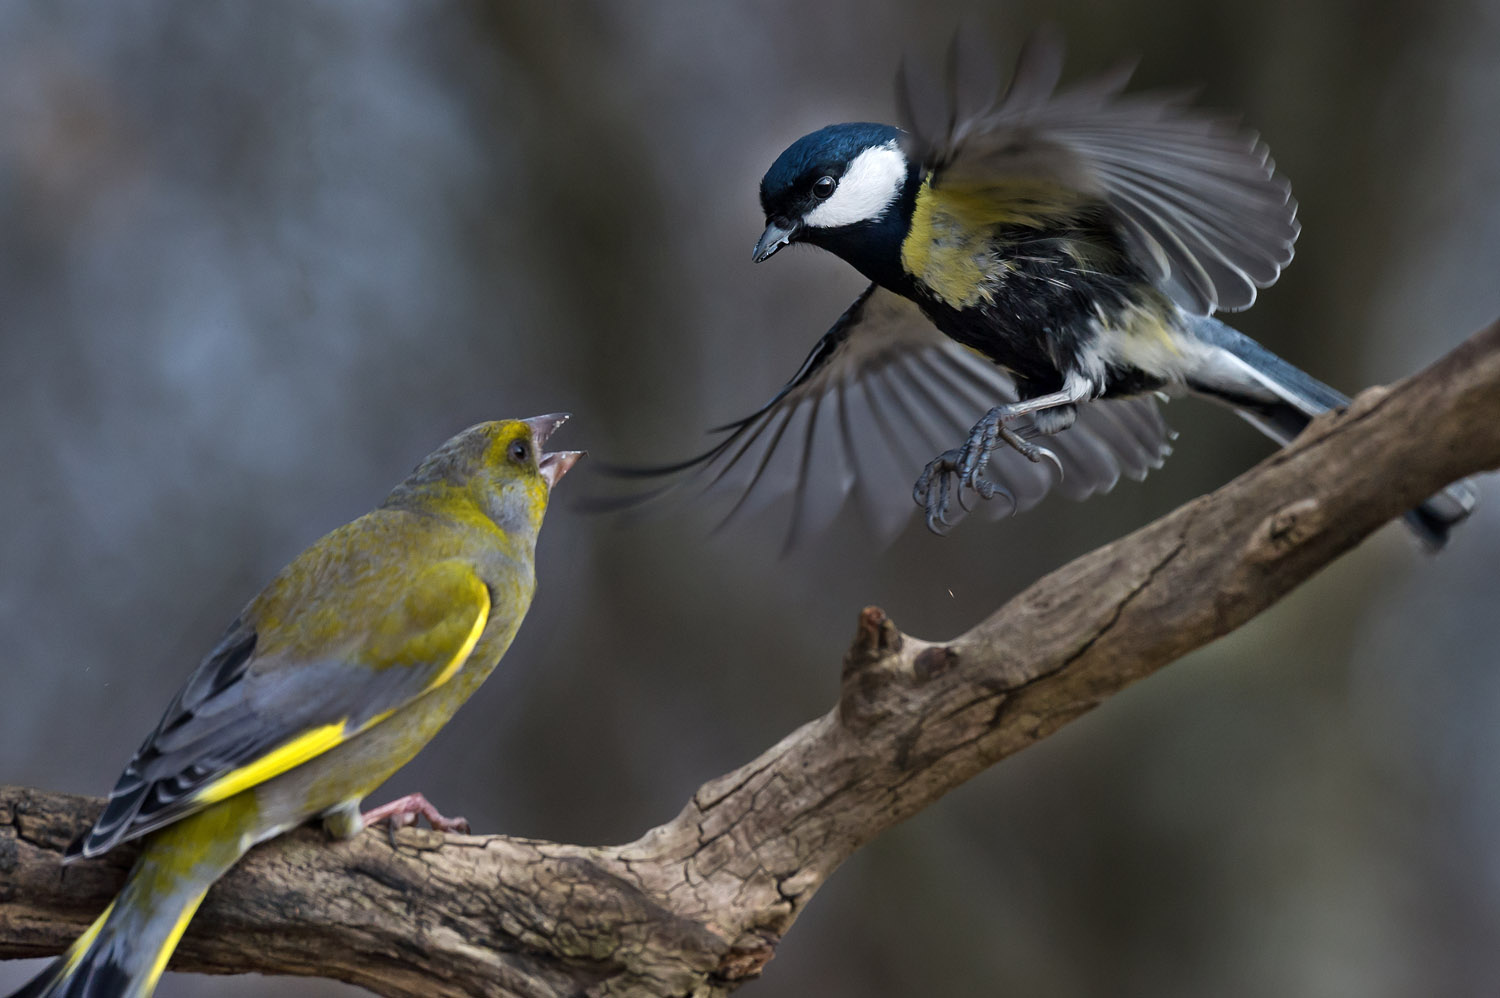 Greenfinch (Carduelis chloris) and Great Tit (Parus major) 